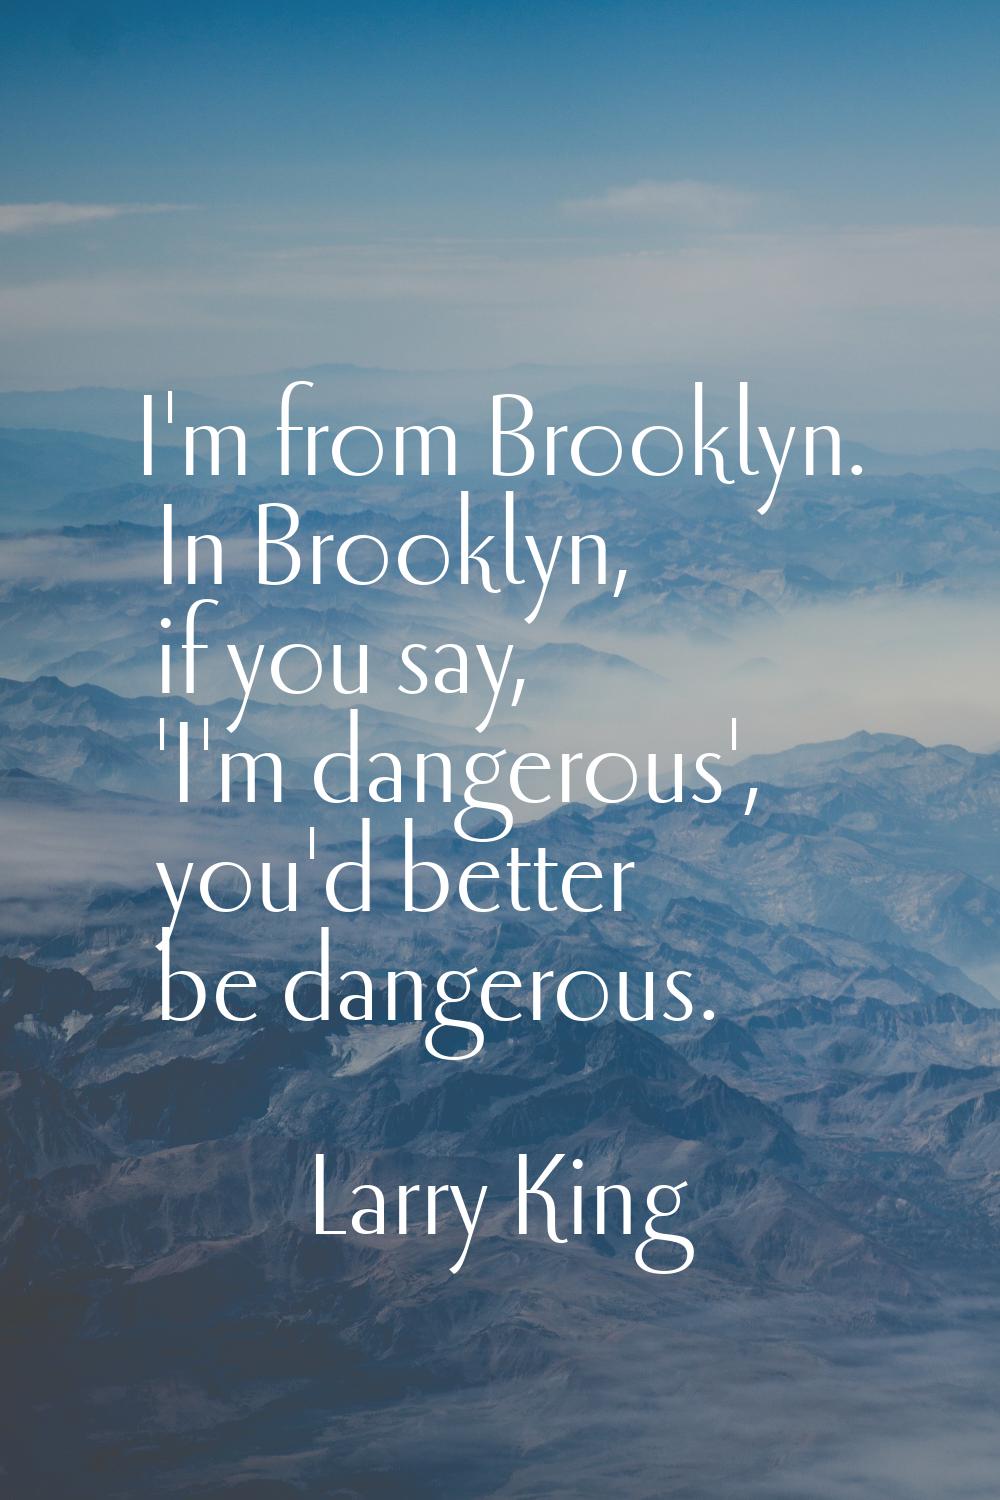 I'm from Brooklyn. In Brooklyn, if you say, 'I'm dangerous', you'd better be dangerous.